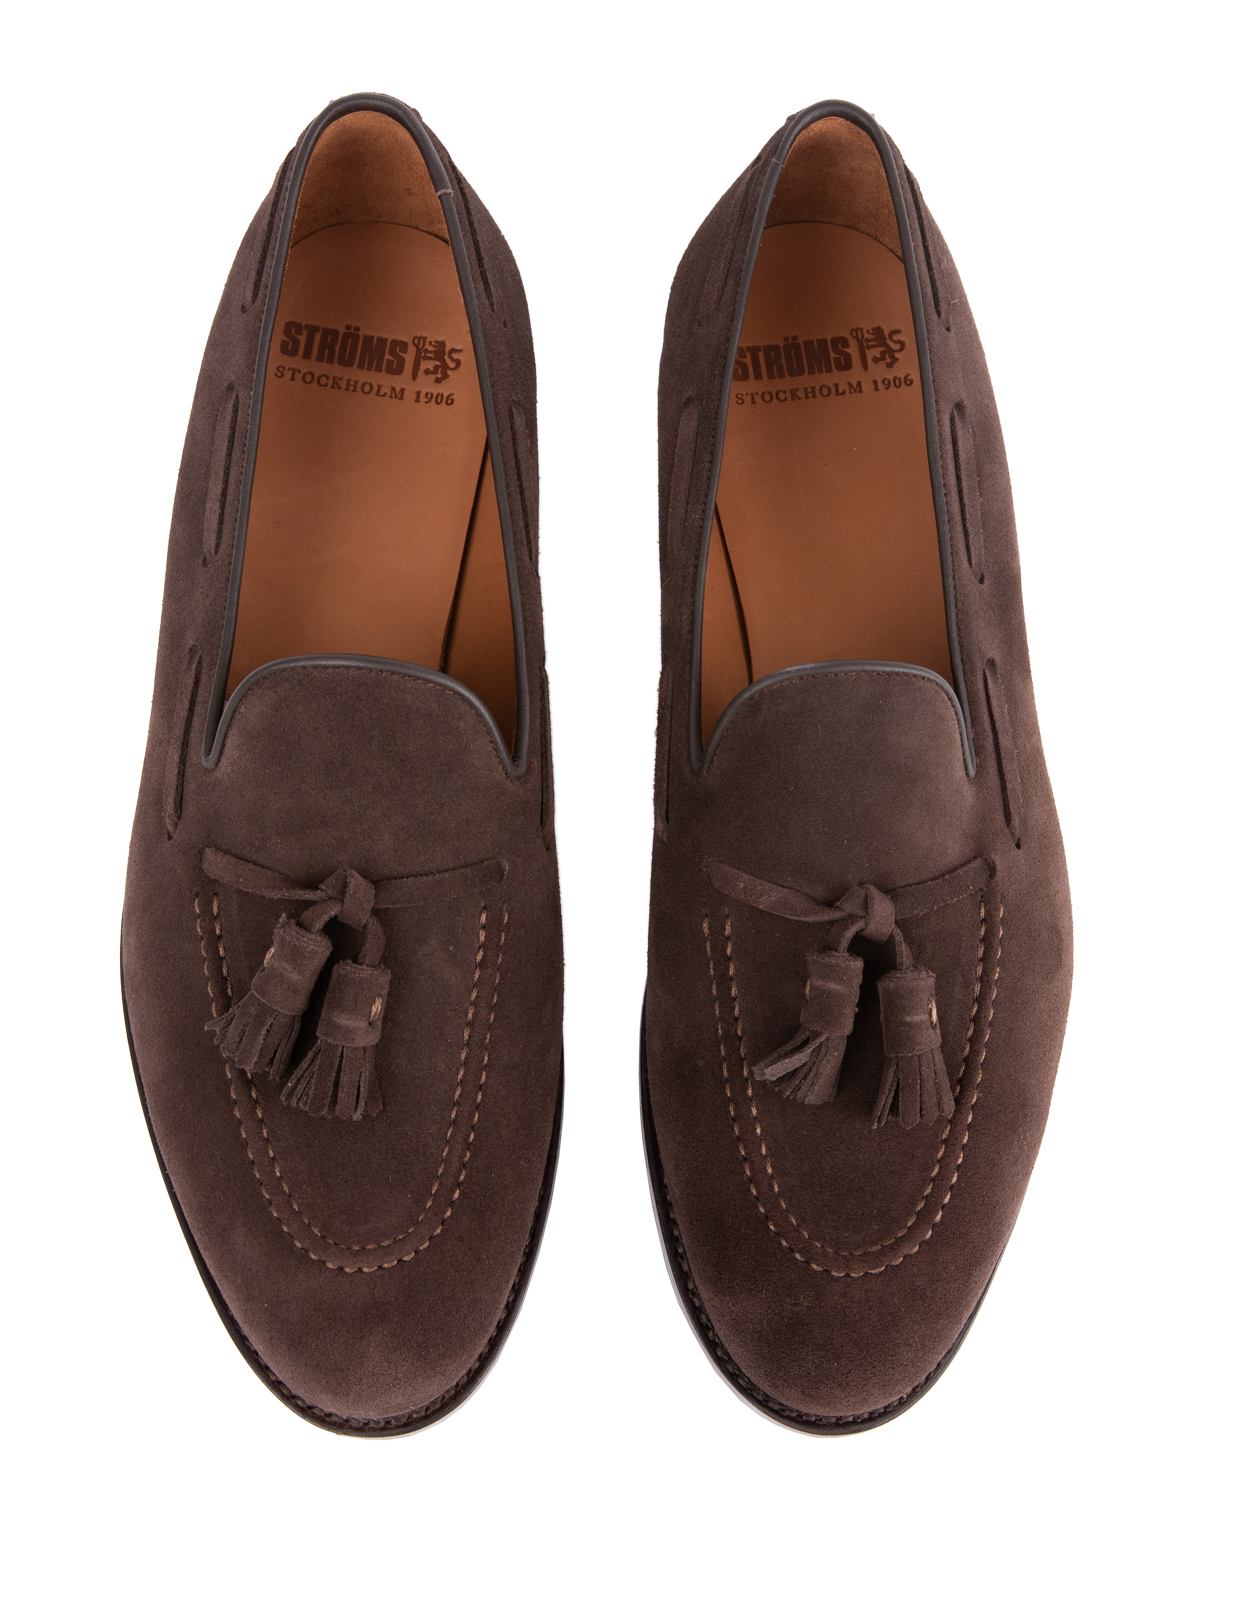 Tassel Loafers Suede Bitter Chocolate Stl 11